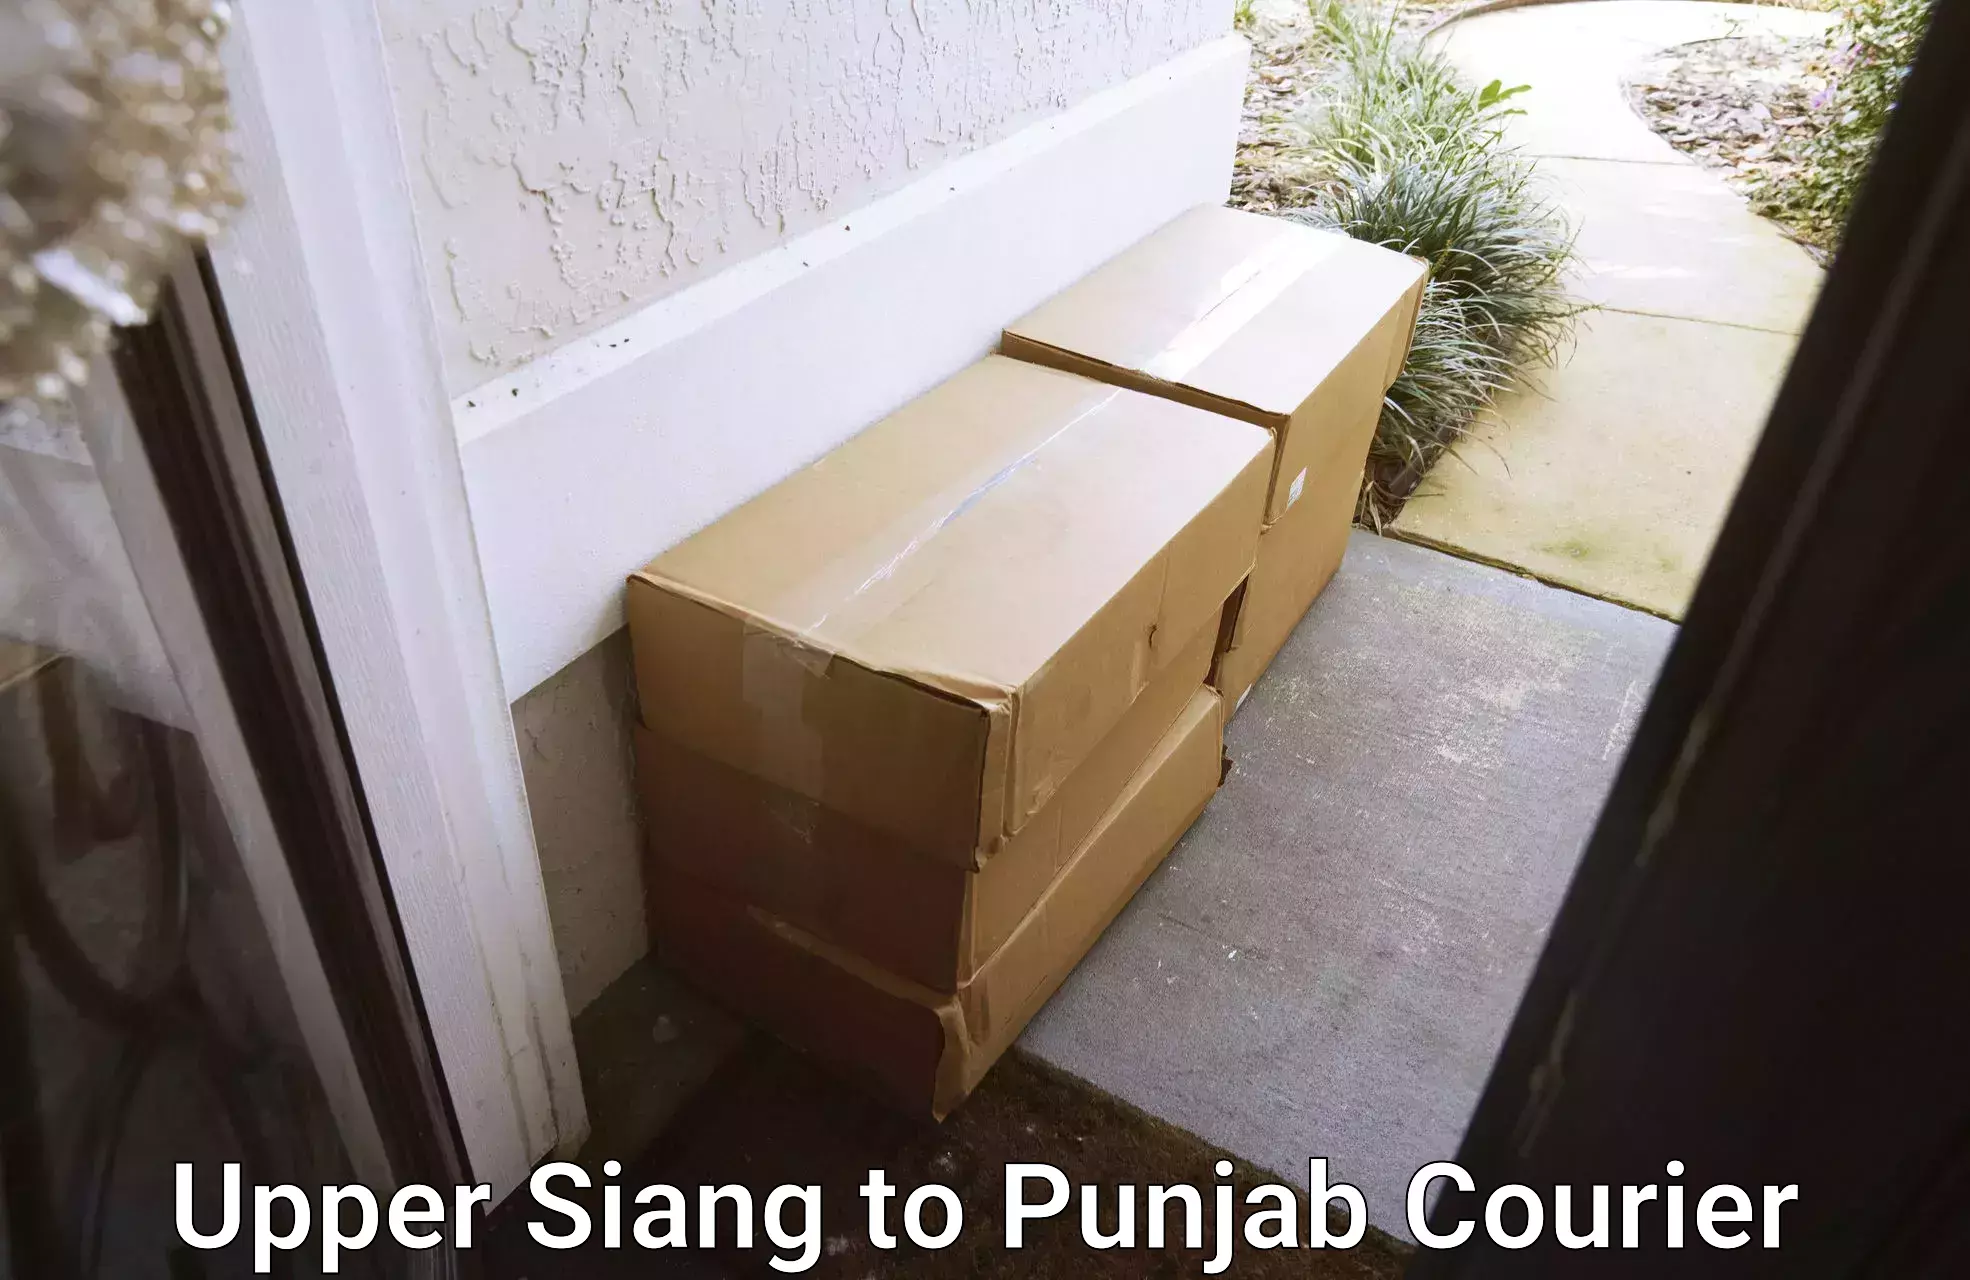 Large package courier Upper Siang to Punjab